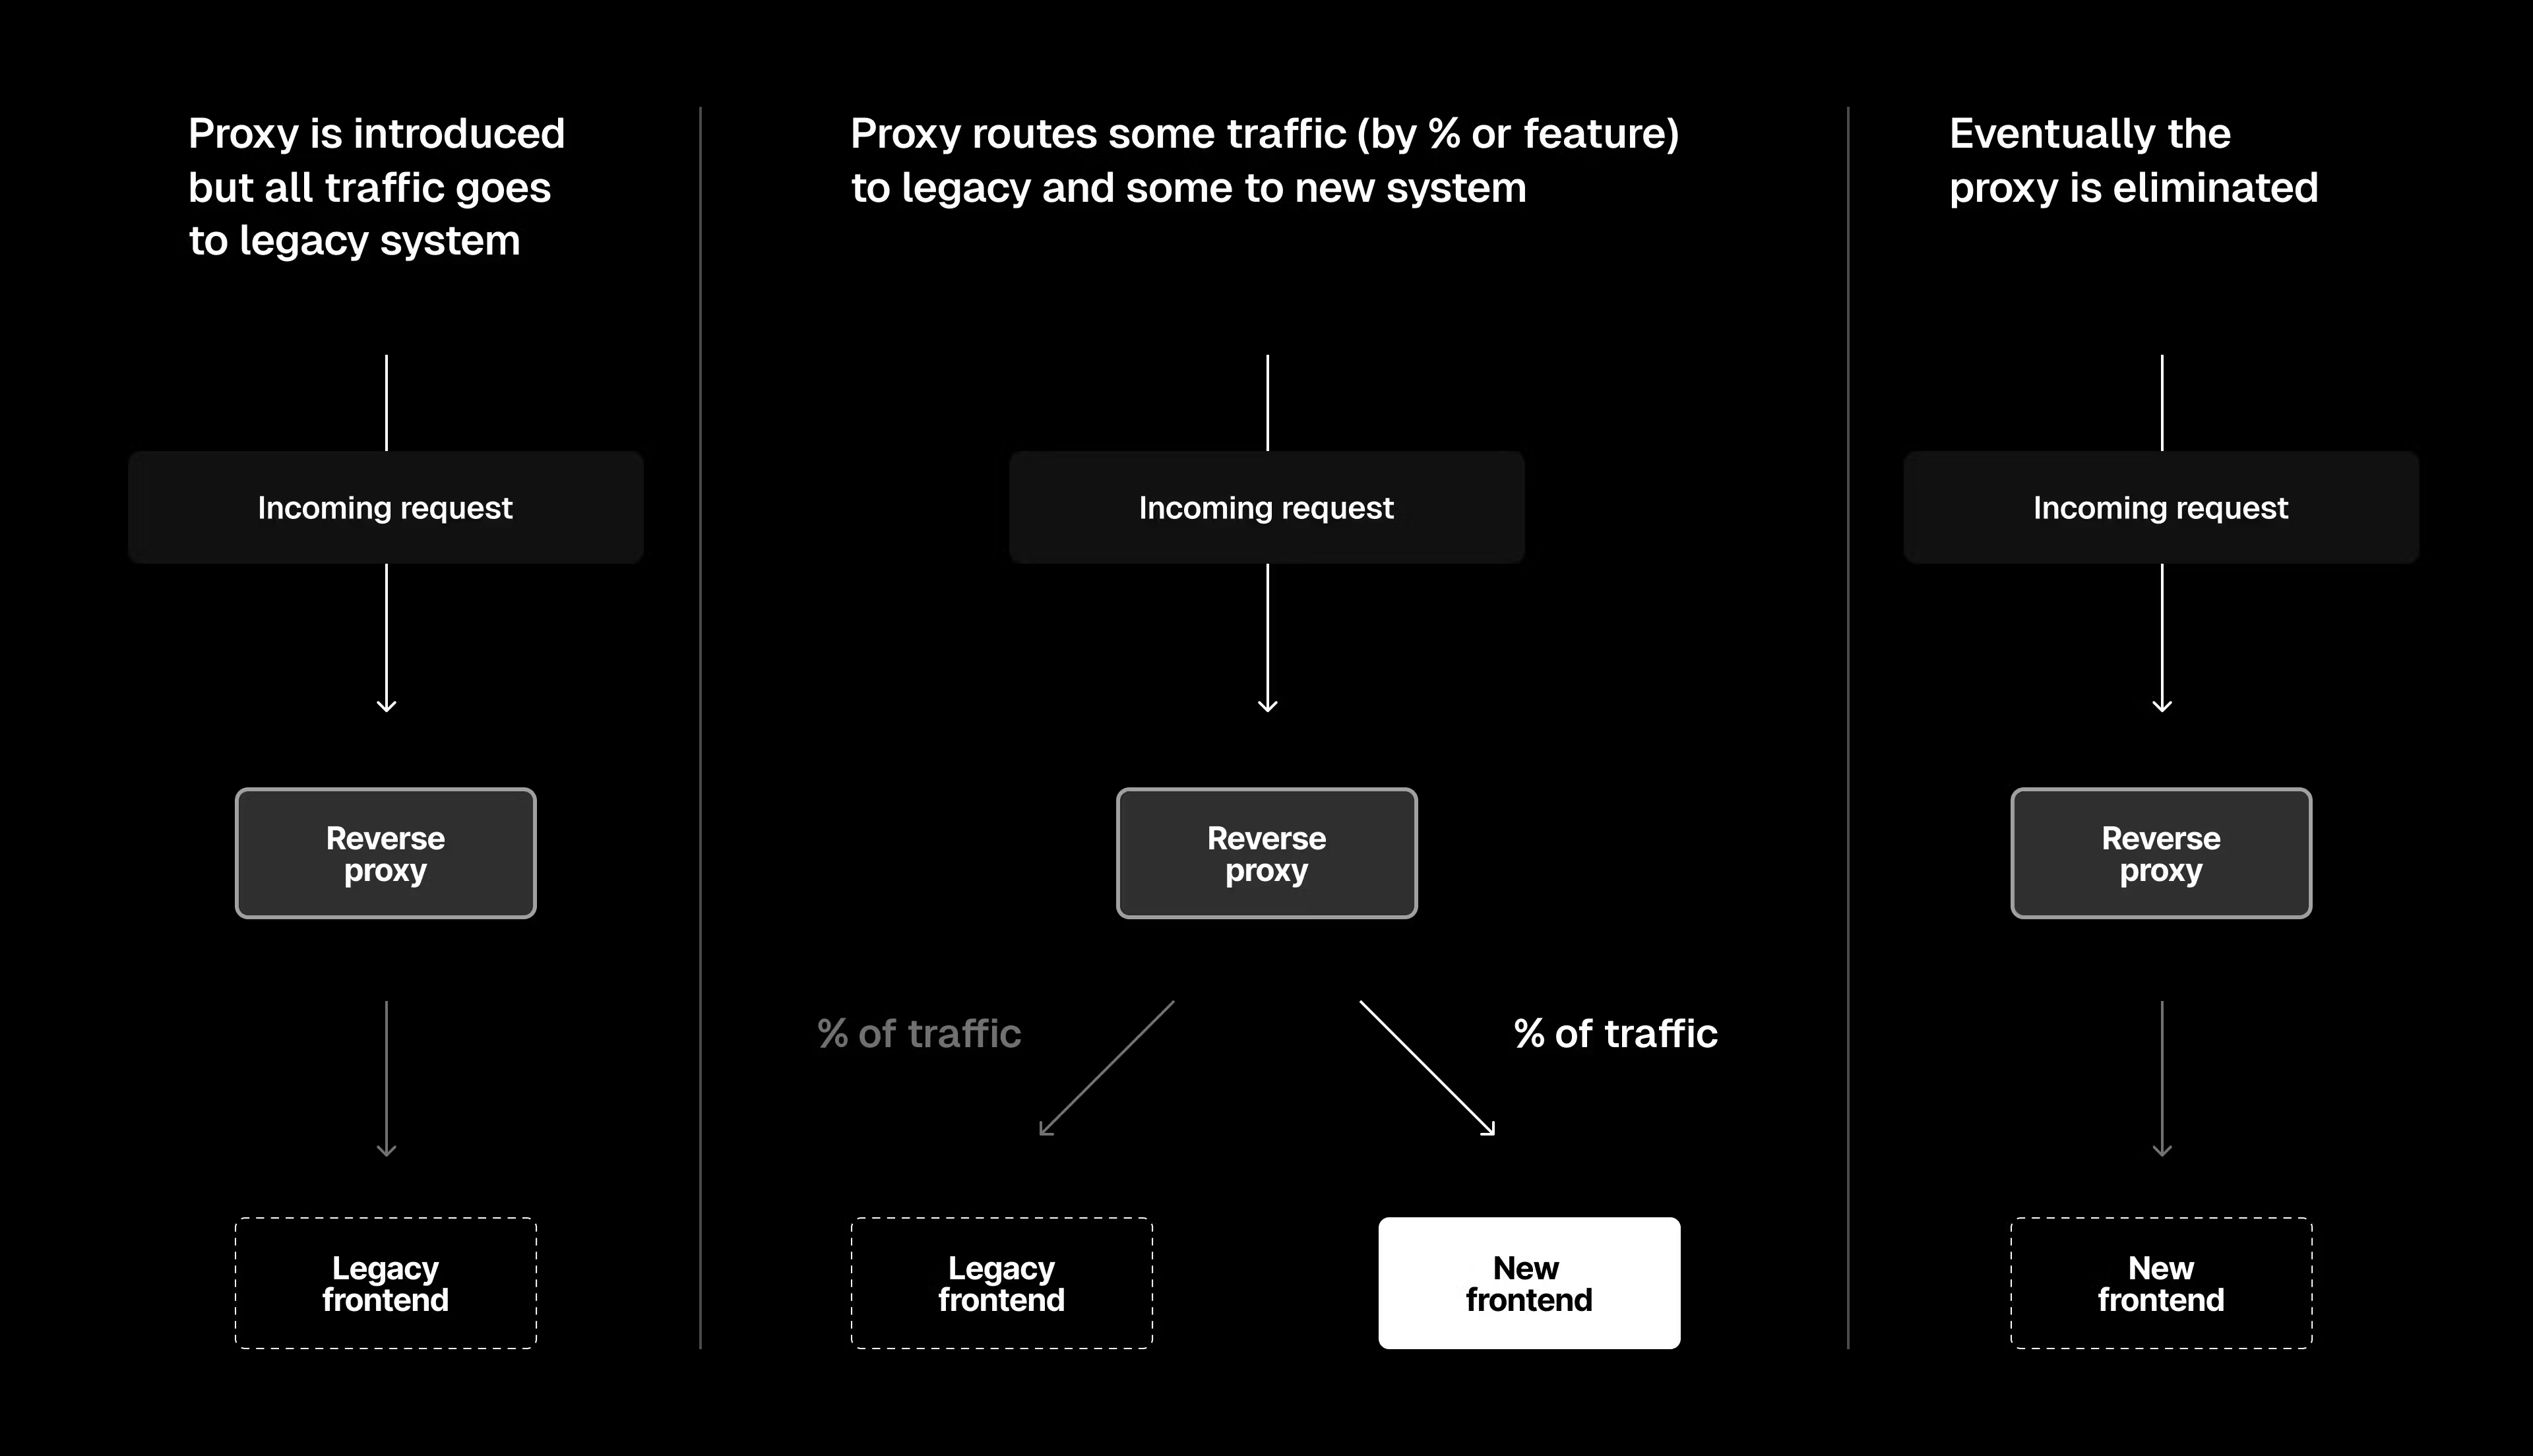 During a migration, incoming traffic will be routed by a reverse proxy, which allows you to use feature flagging to iteratively designate what percentage of users should go to a new page.